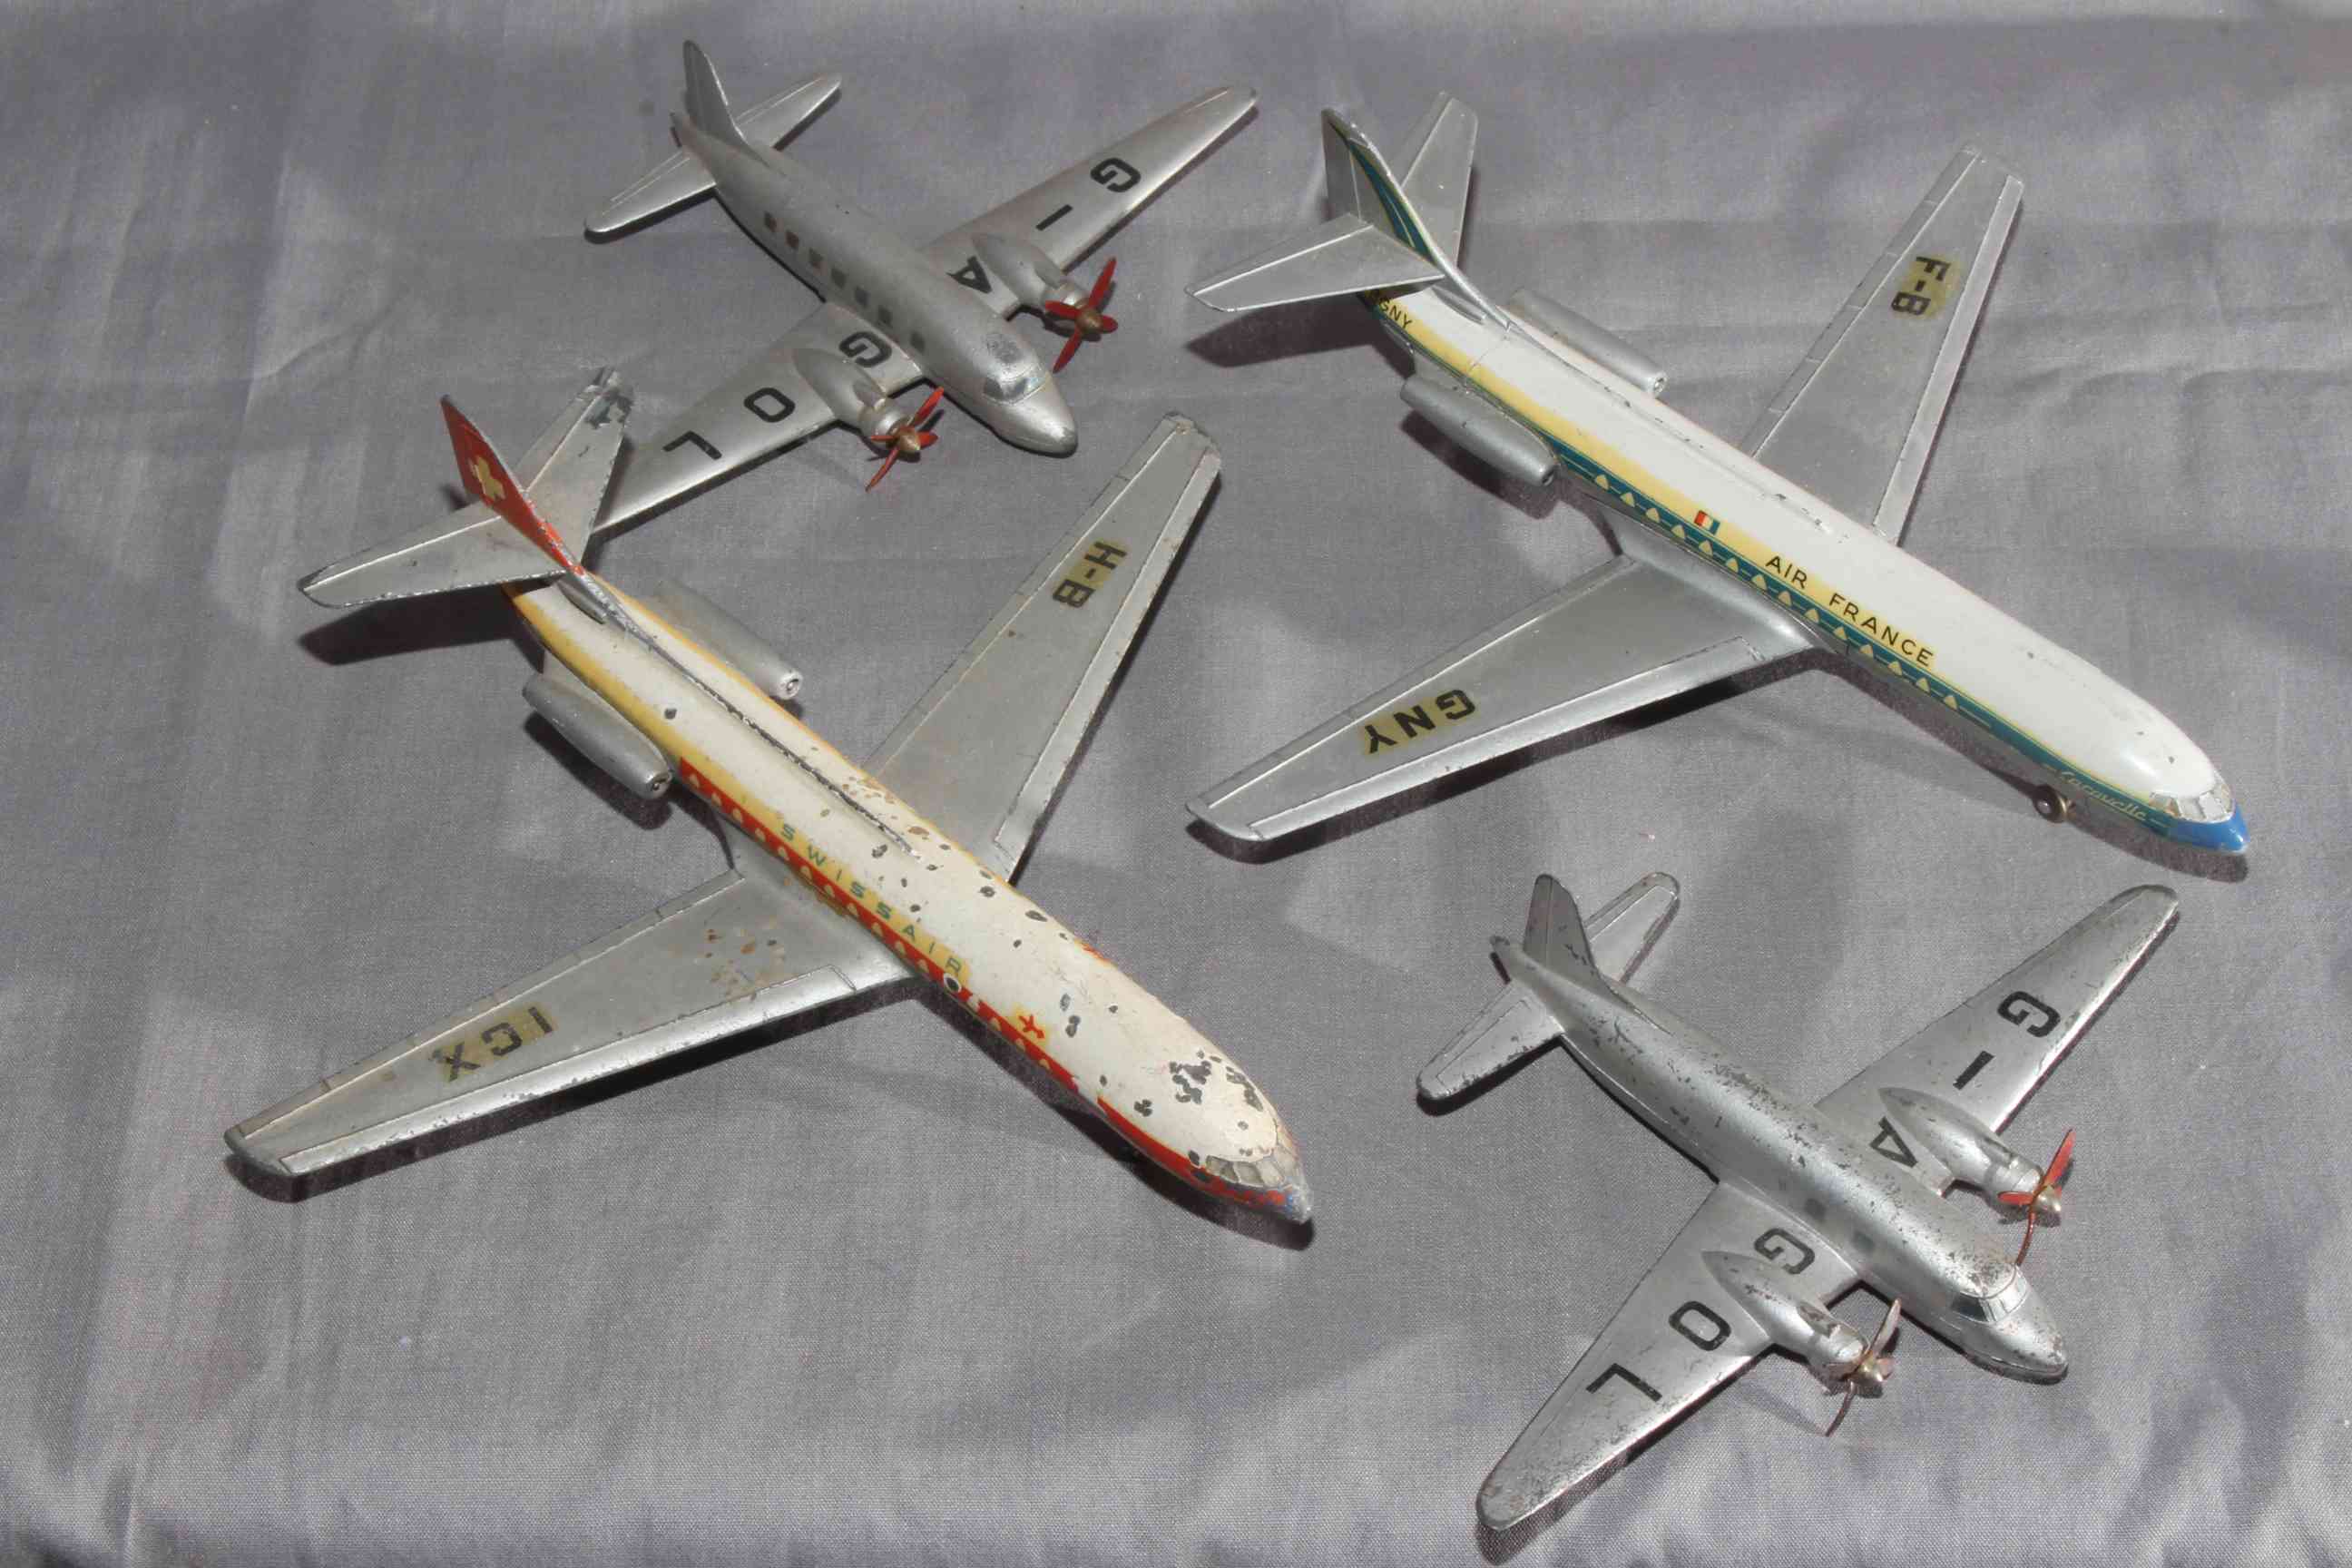 Nine Dinky aircraft Caravelle SE 210, Viking, York, Ensign and Armstrong Whitworth.